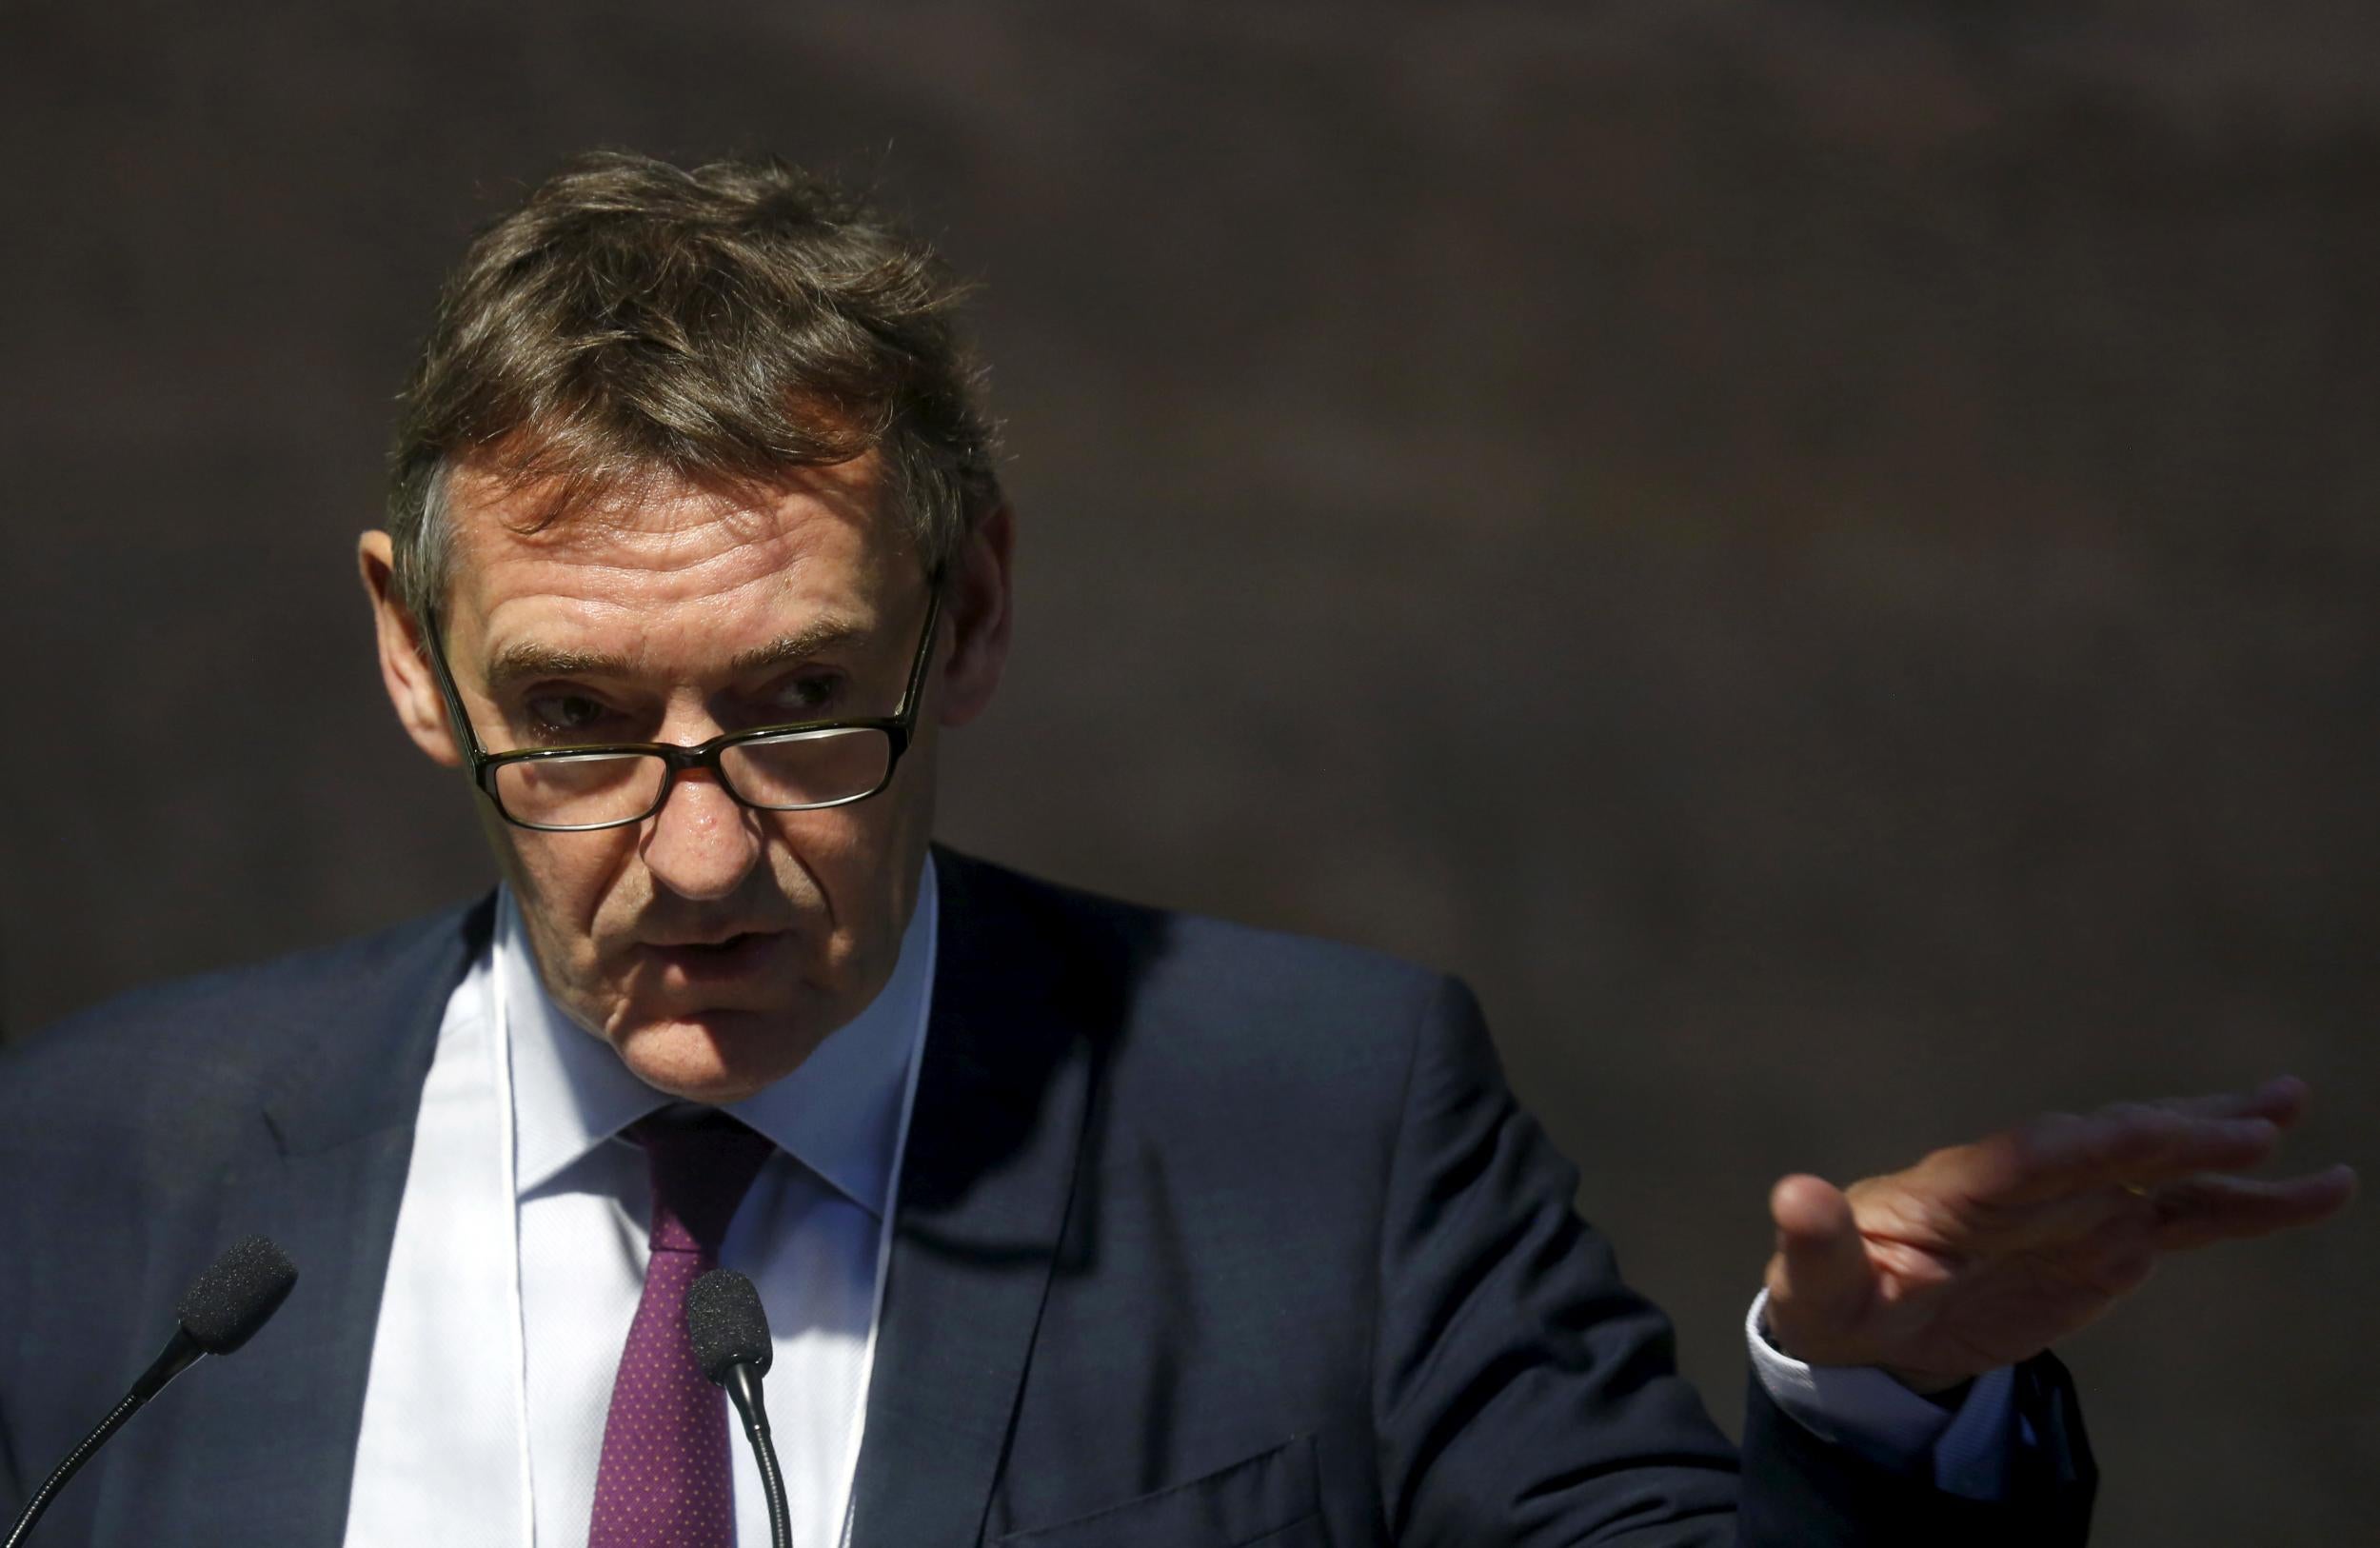 Jim O'Neill told BBC radio that divisions in the Conservative party were driving Brexit negotiations